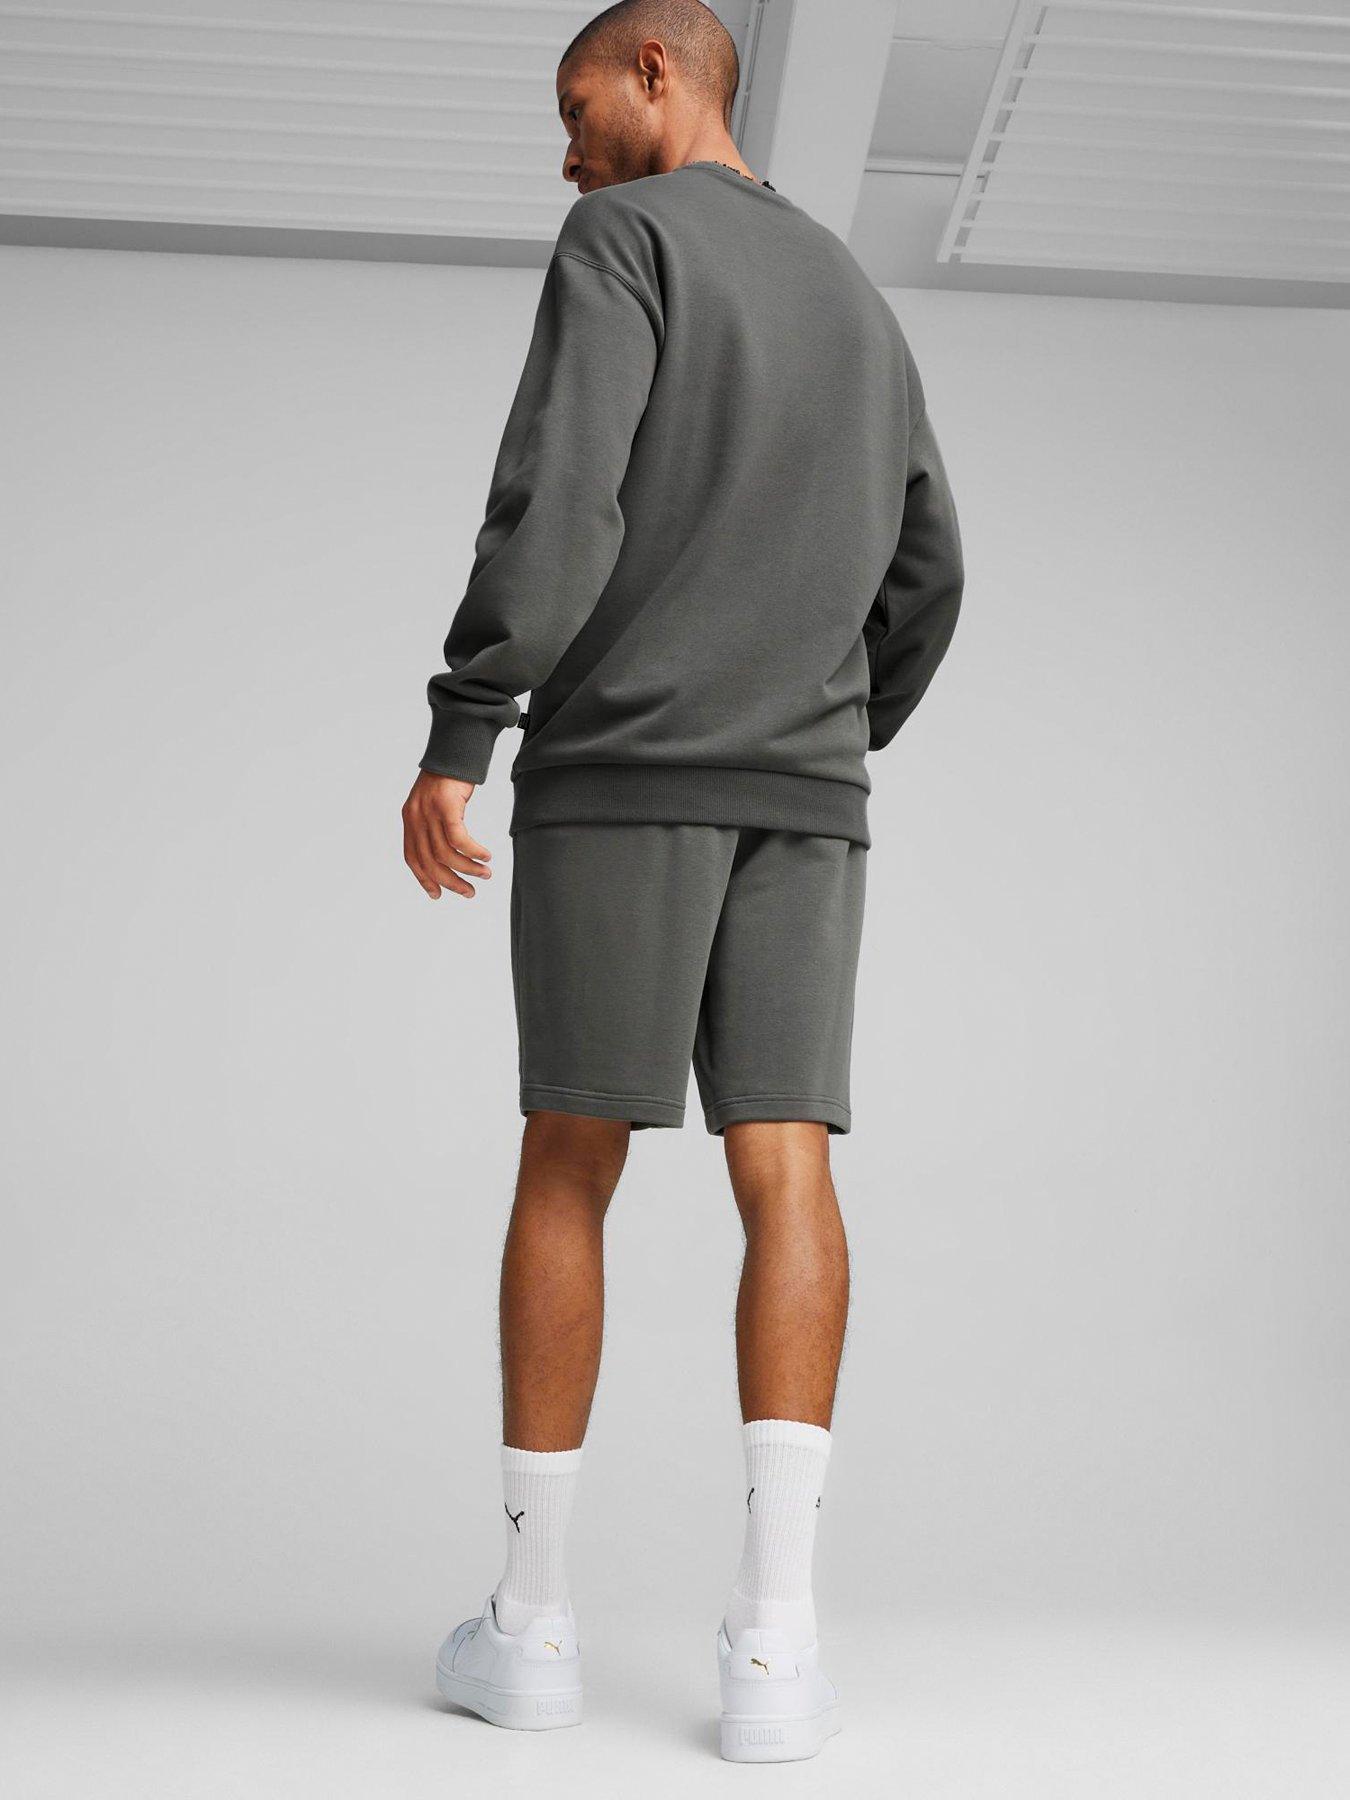 Puma Mens Relaxed Sweat Suit - Grey | Very.co.uk